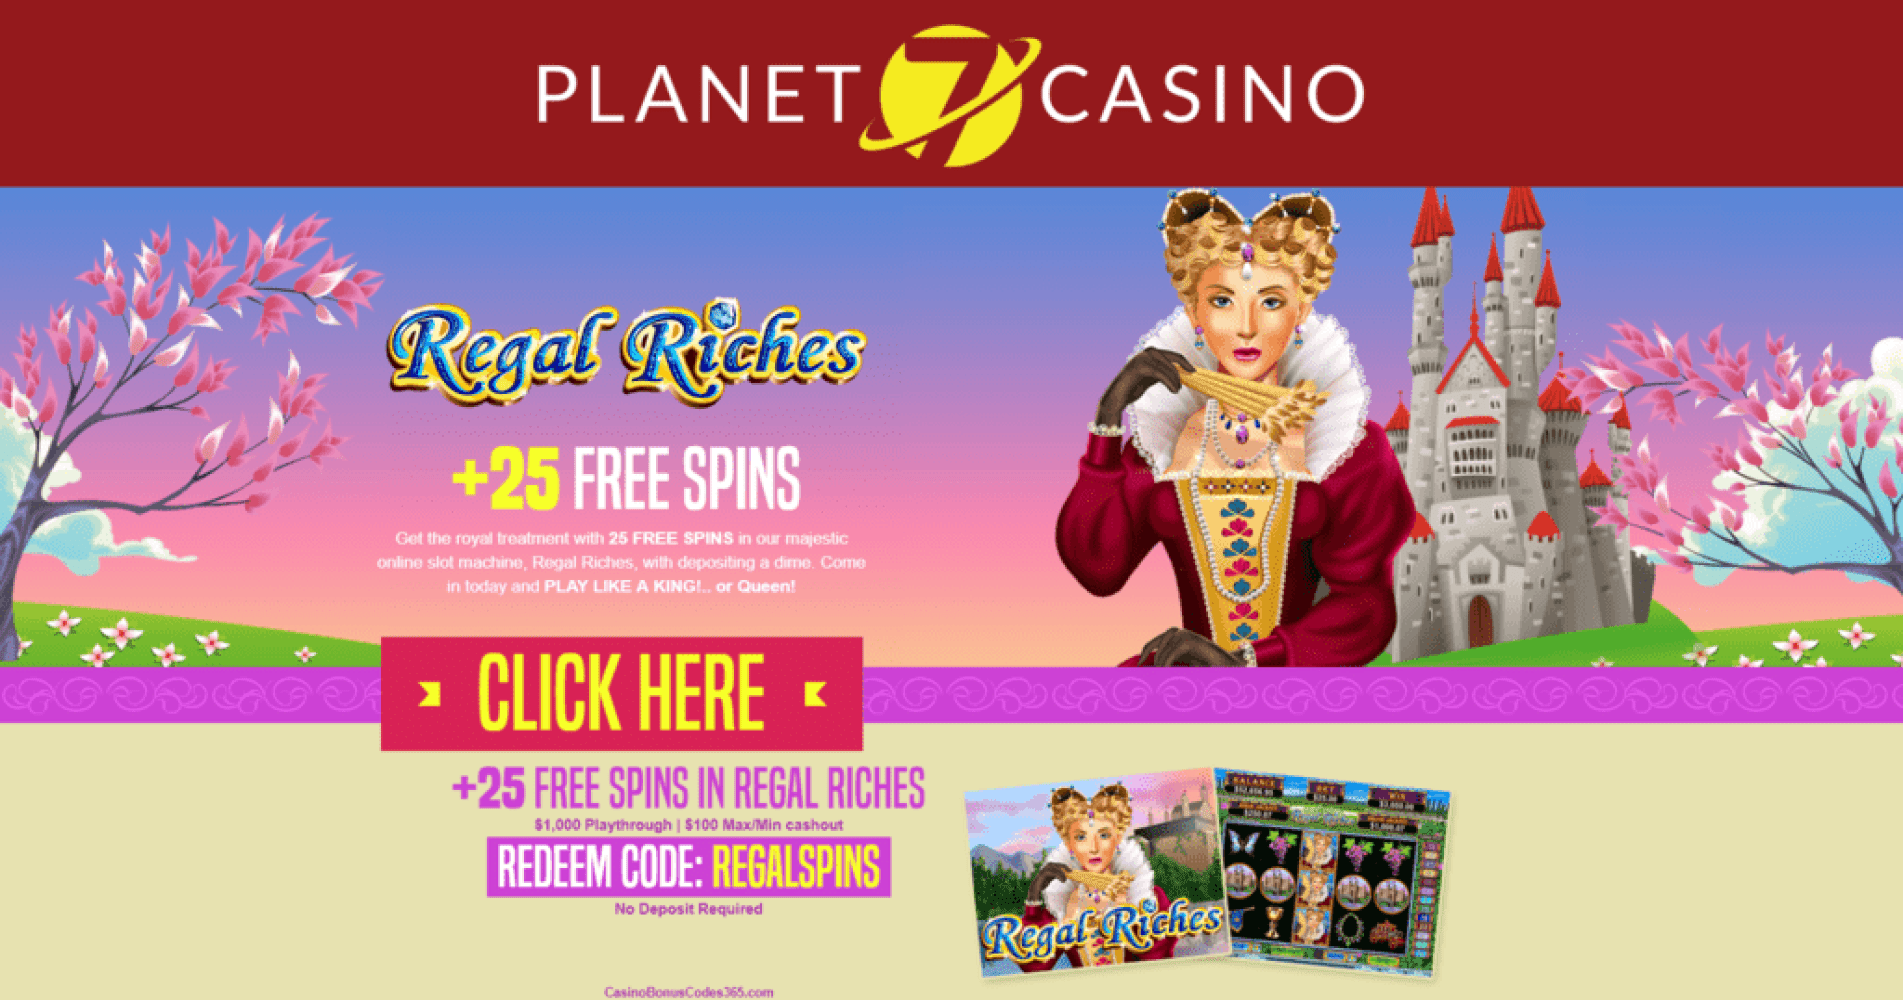 30 free Spins - 31509